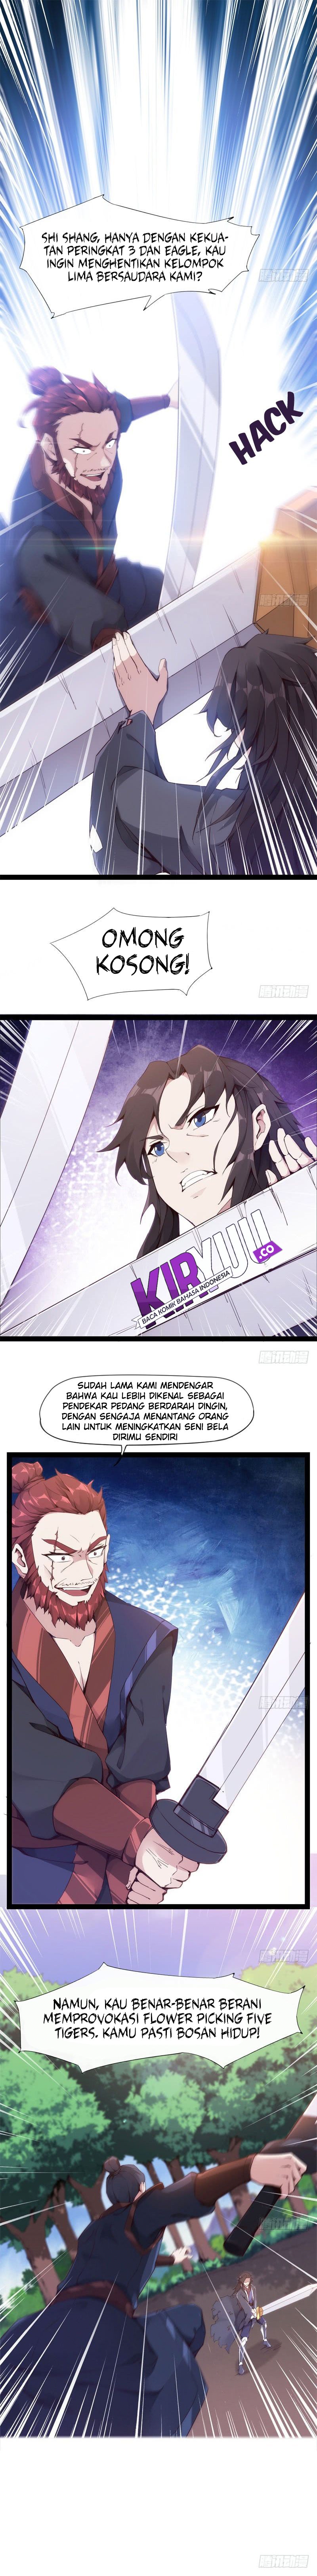 Path of the Sword Chapter 01